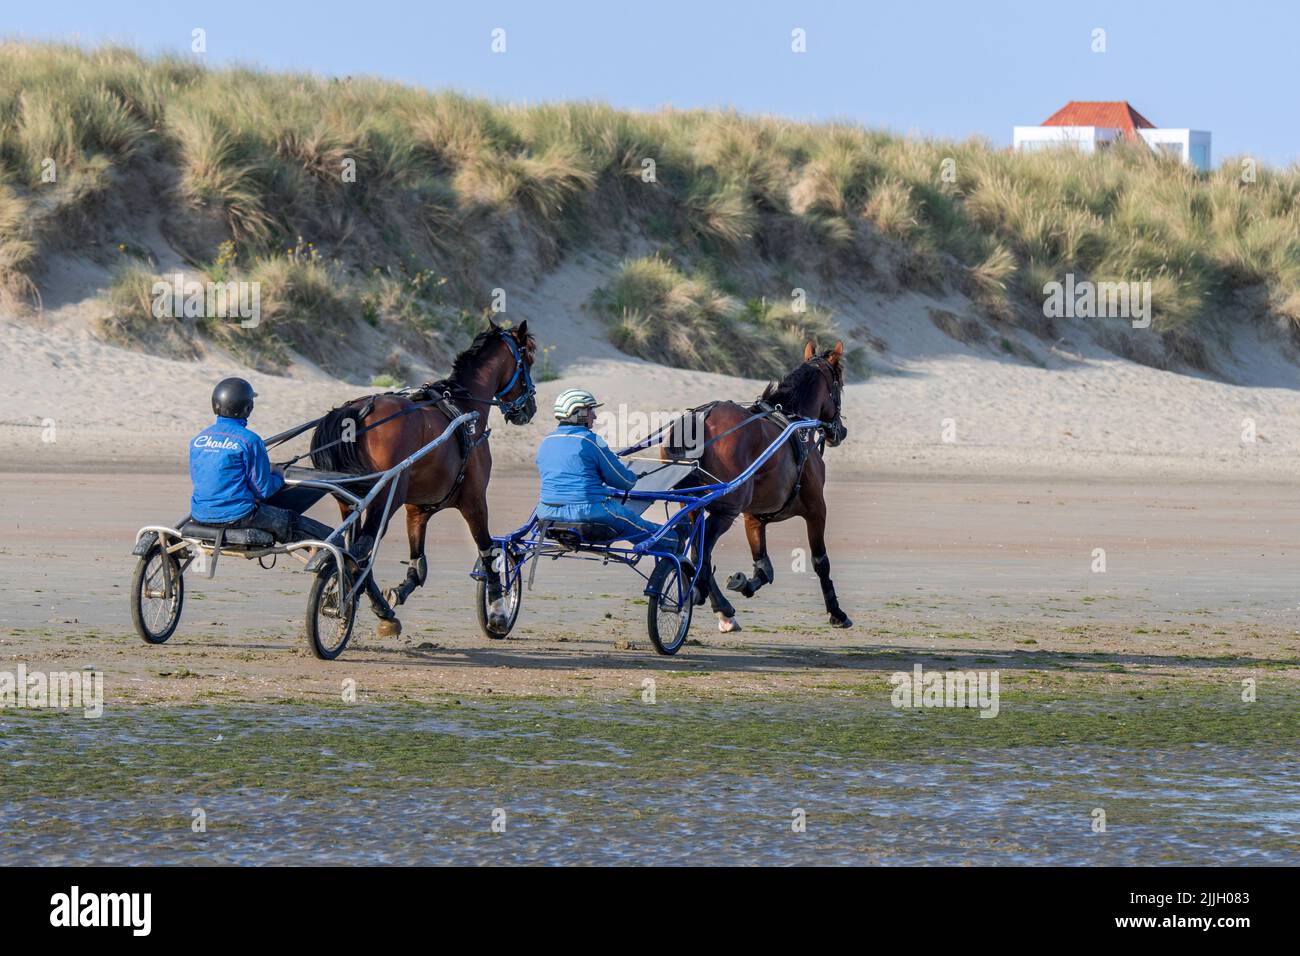 Two harness racing horses being exercised on the beach, showing drivers riding a two-wheeled cart called a sulky Stock Photo